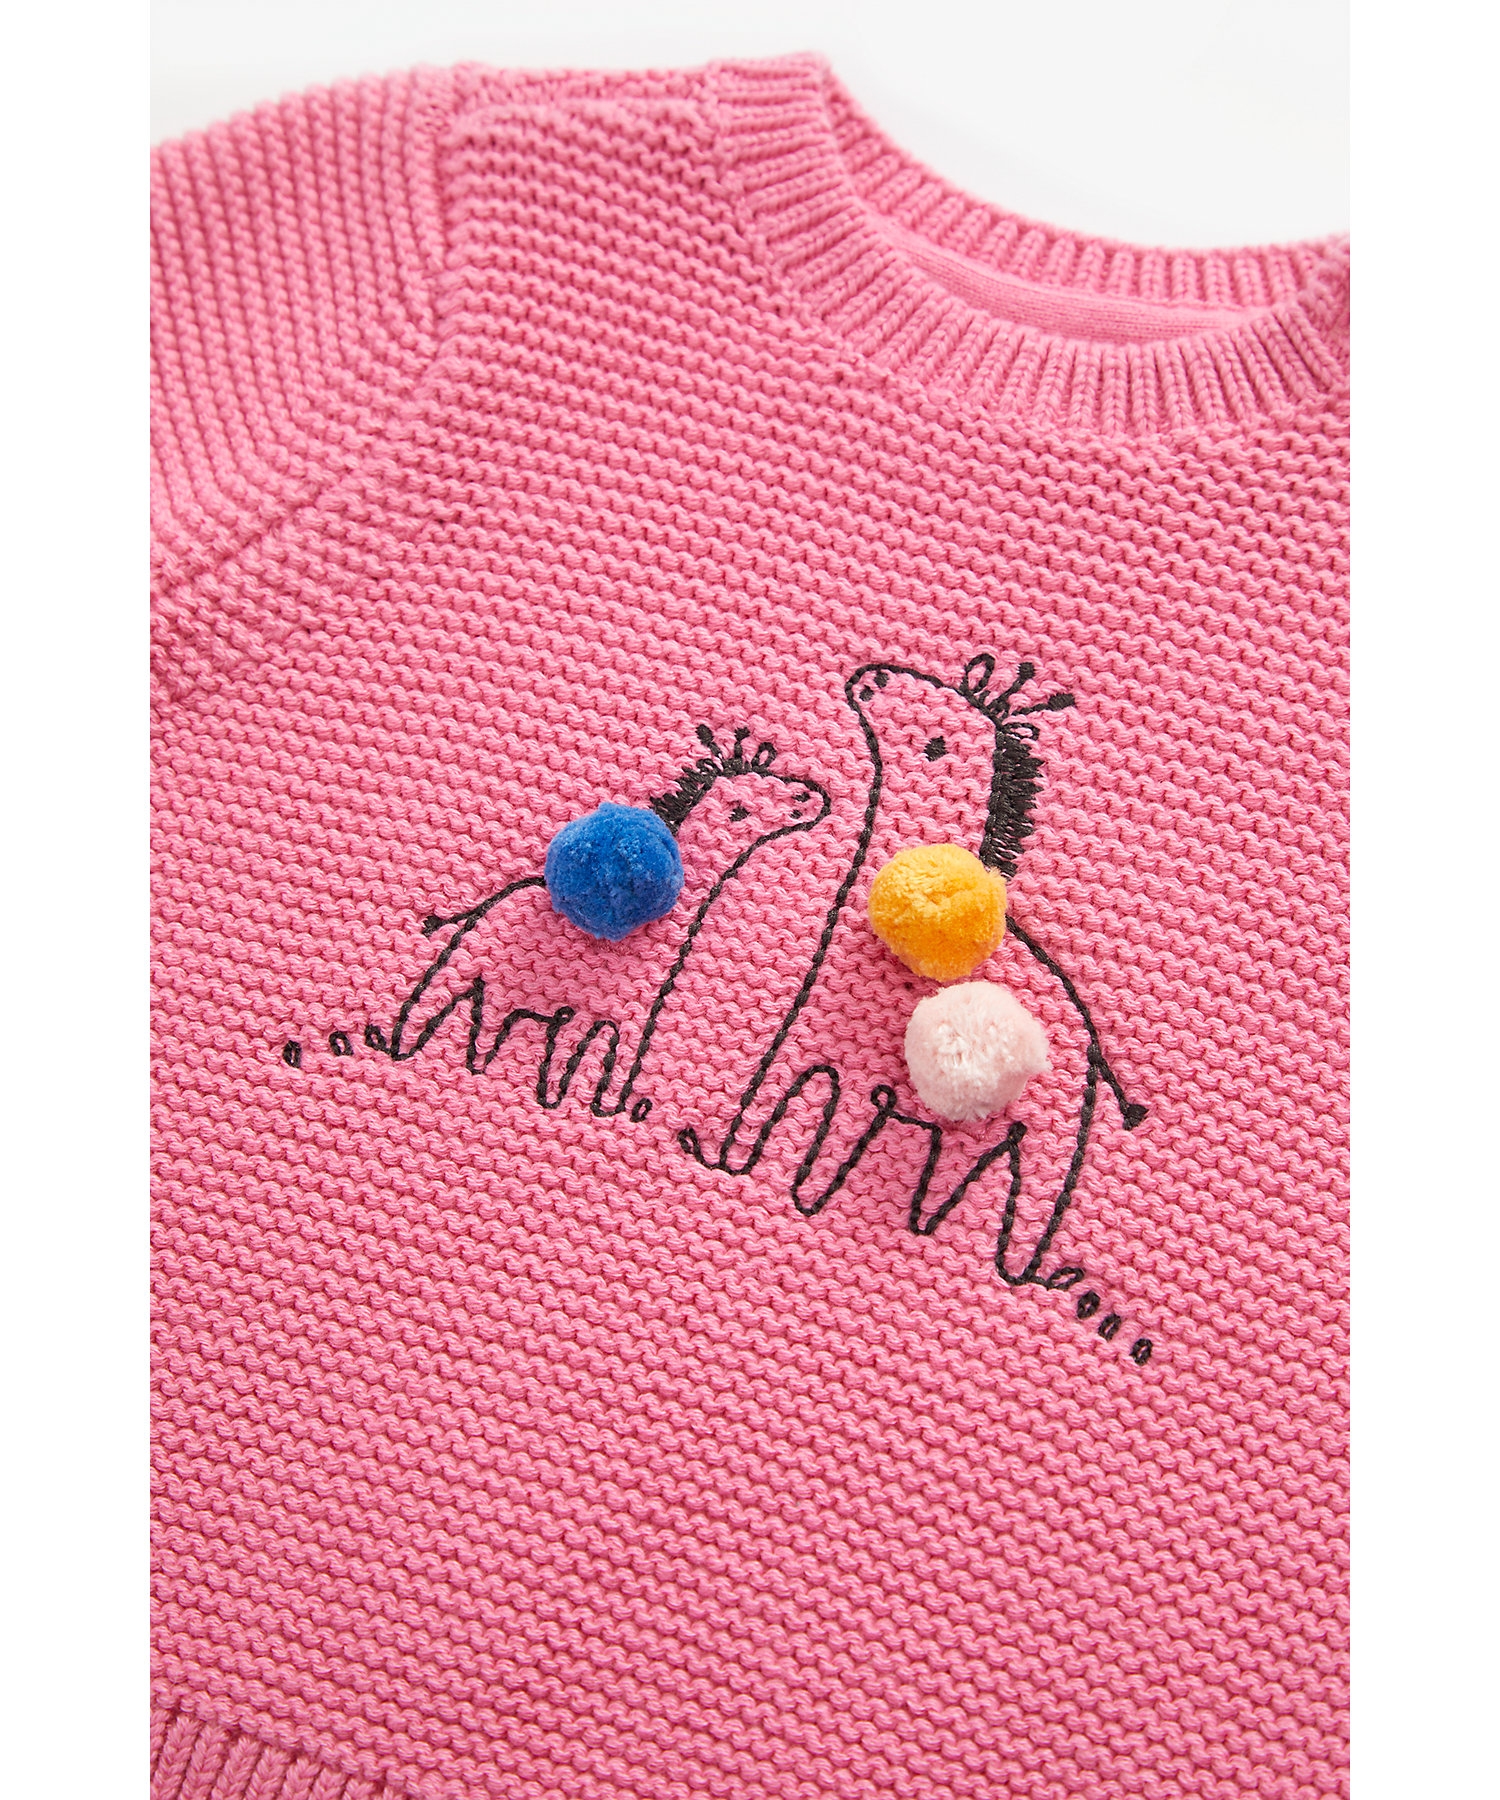 Mothercare | Girls Full Sleeves Sweater Zebra Embroidery And Pom Pom Details - Pink 3